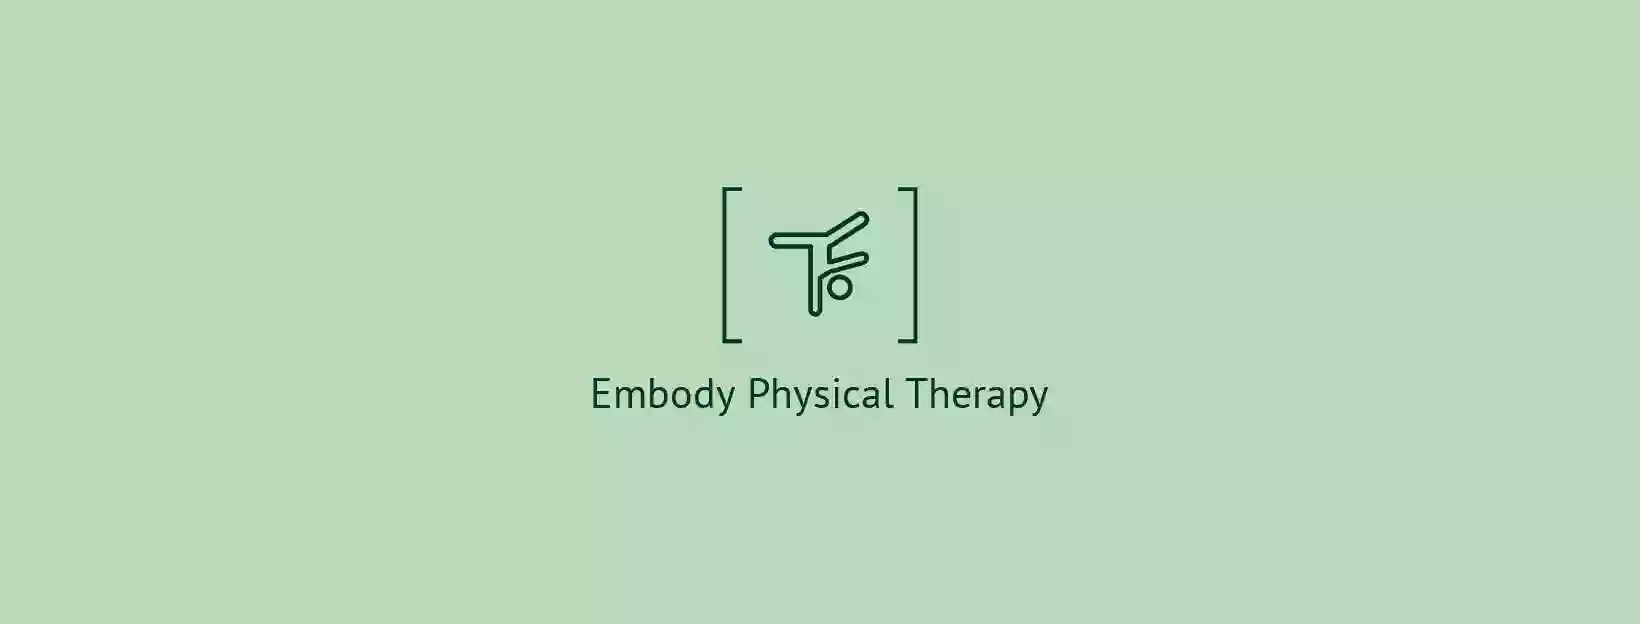 Embody Physical Therapy